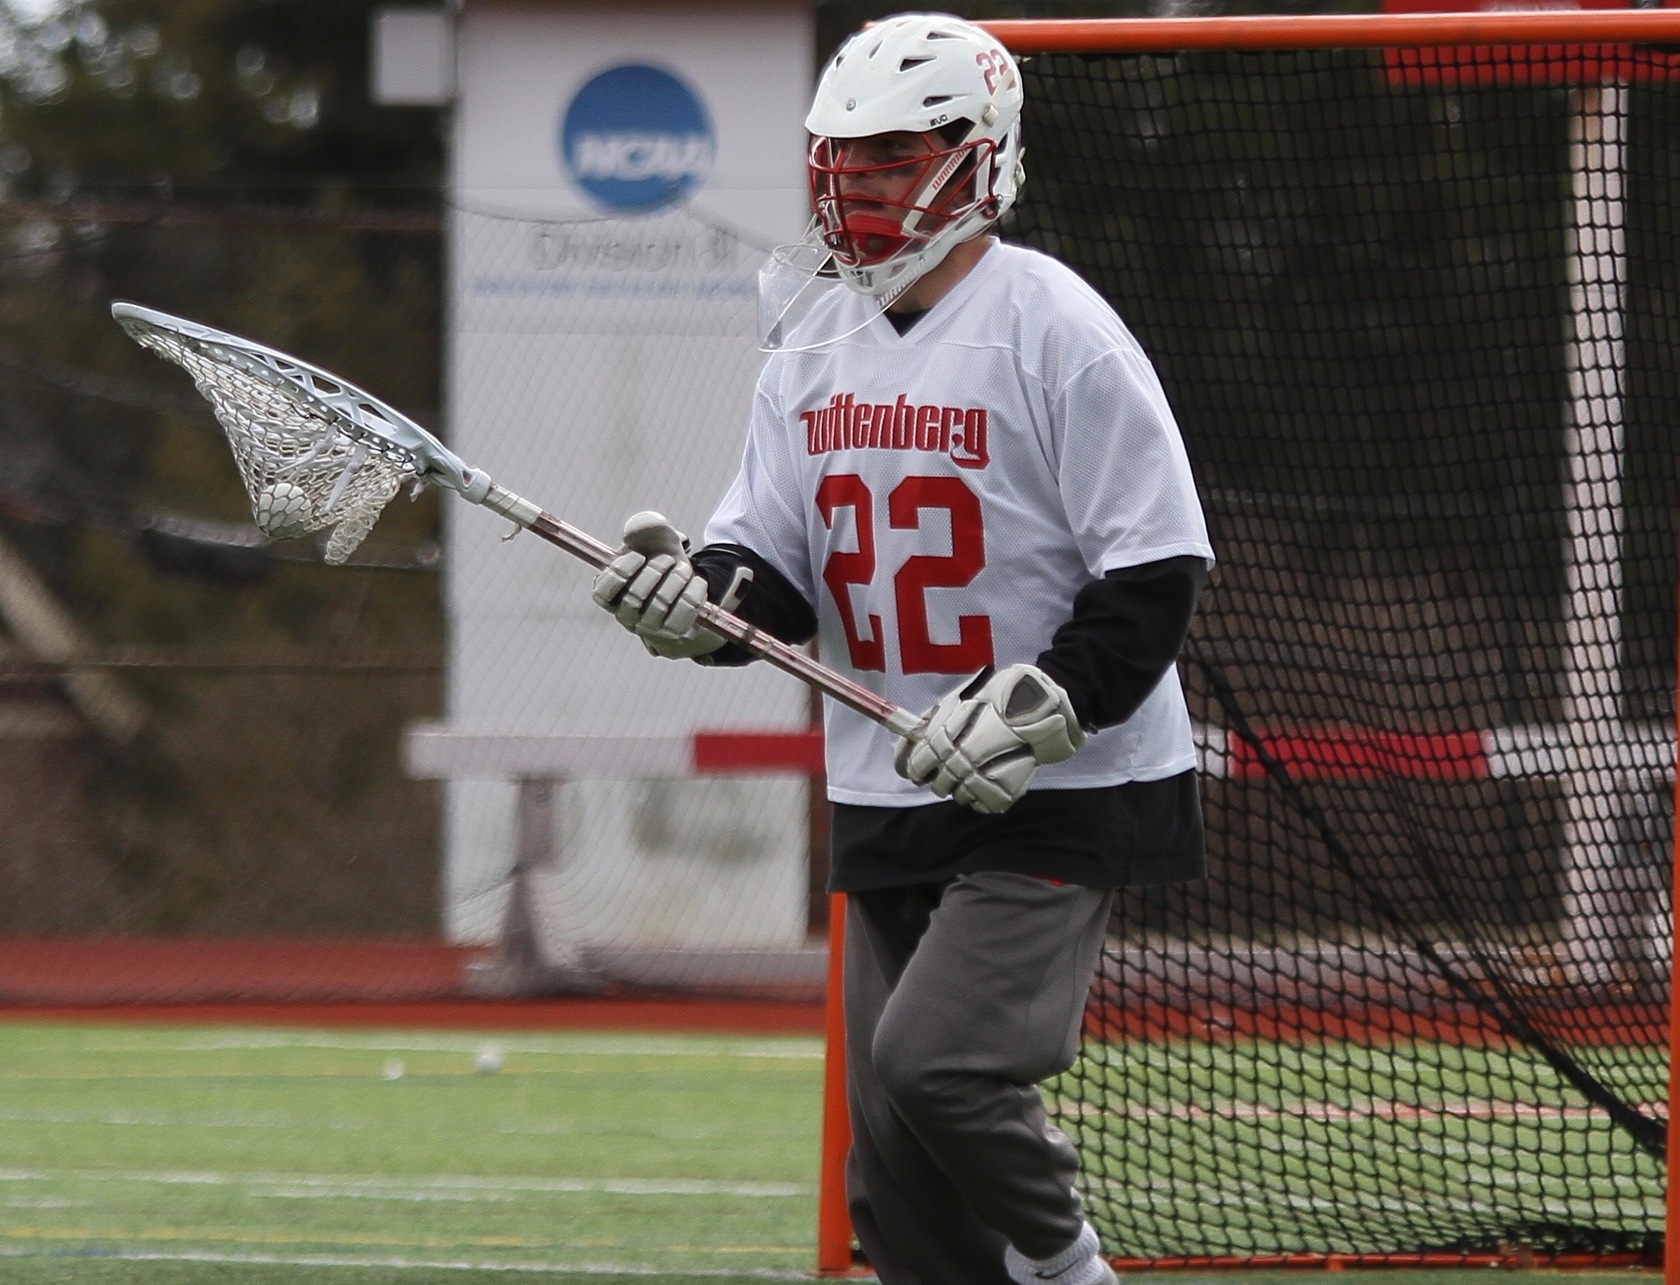 Sophomore Max Cavellier made 10 saves in Wittenberg's heartbreaking 11-10 loss against DePauw